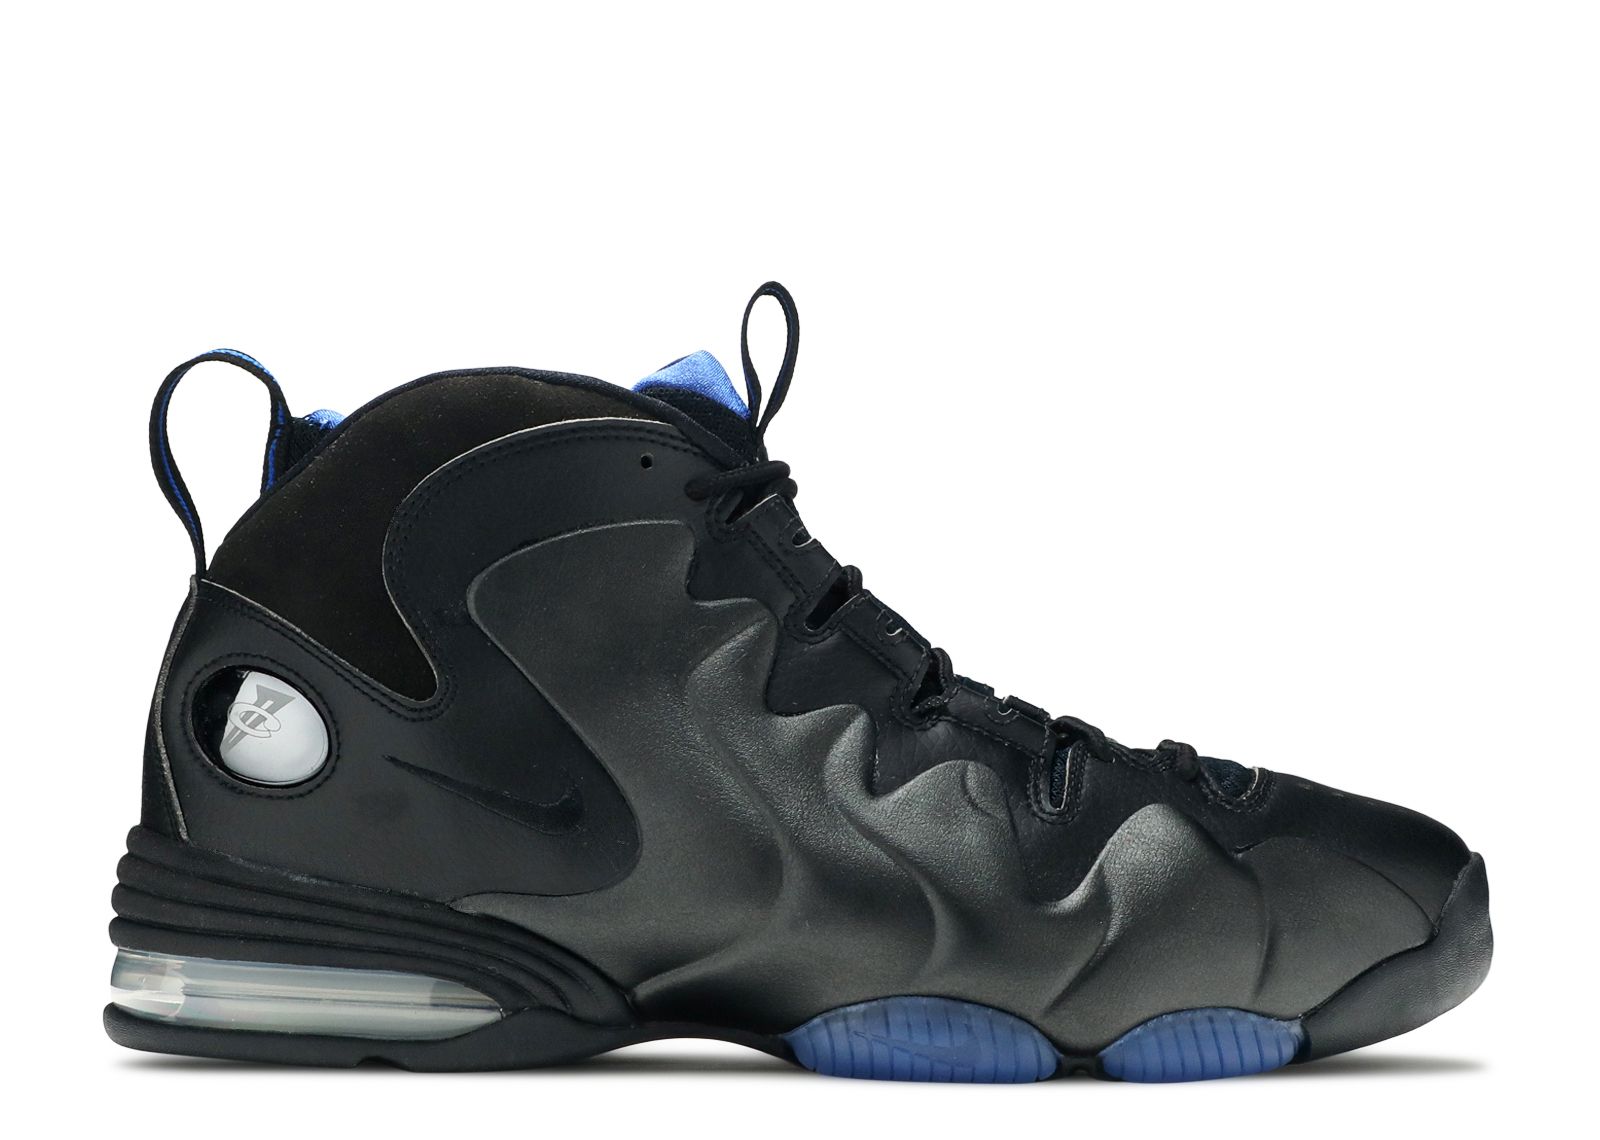 the penny hardaway shoes